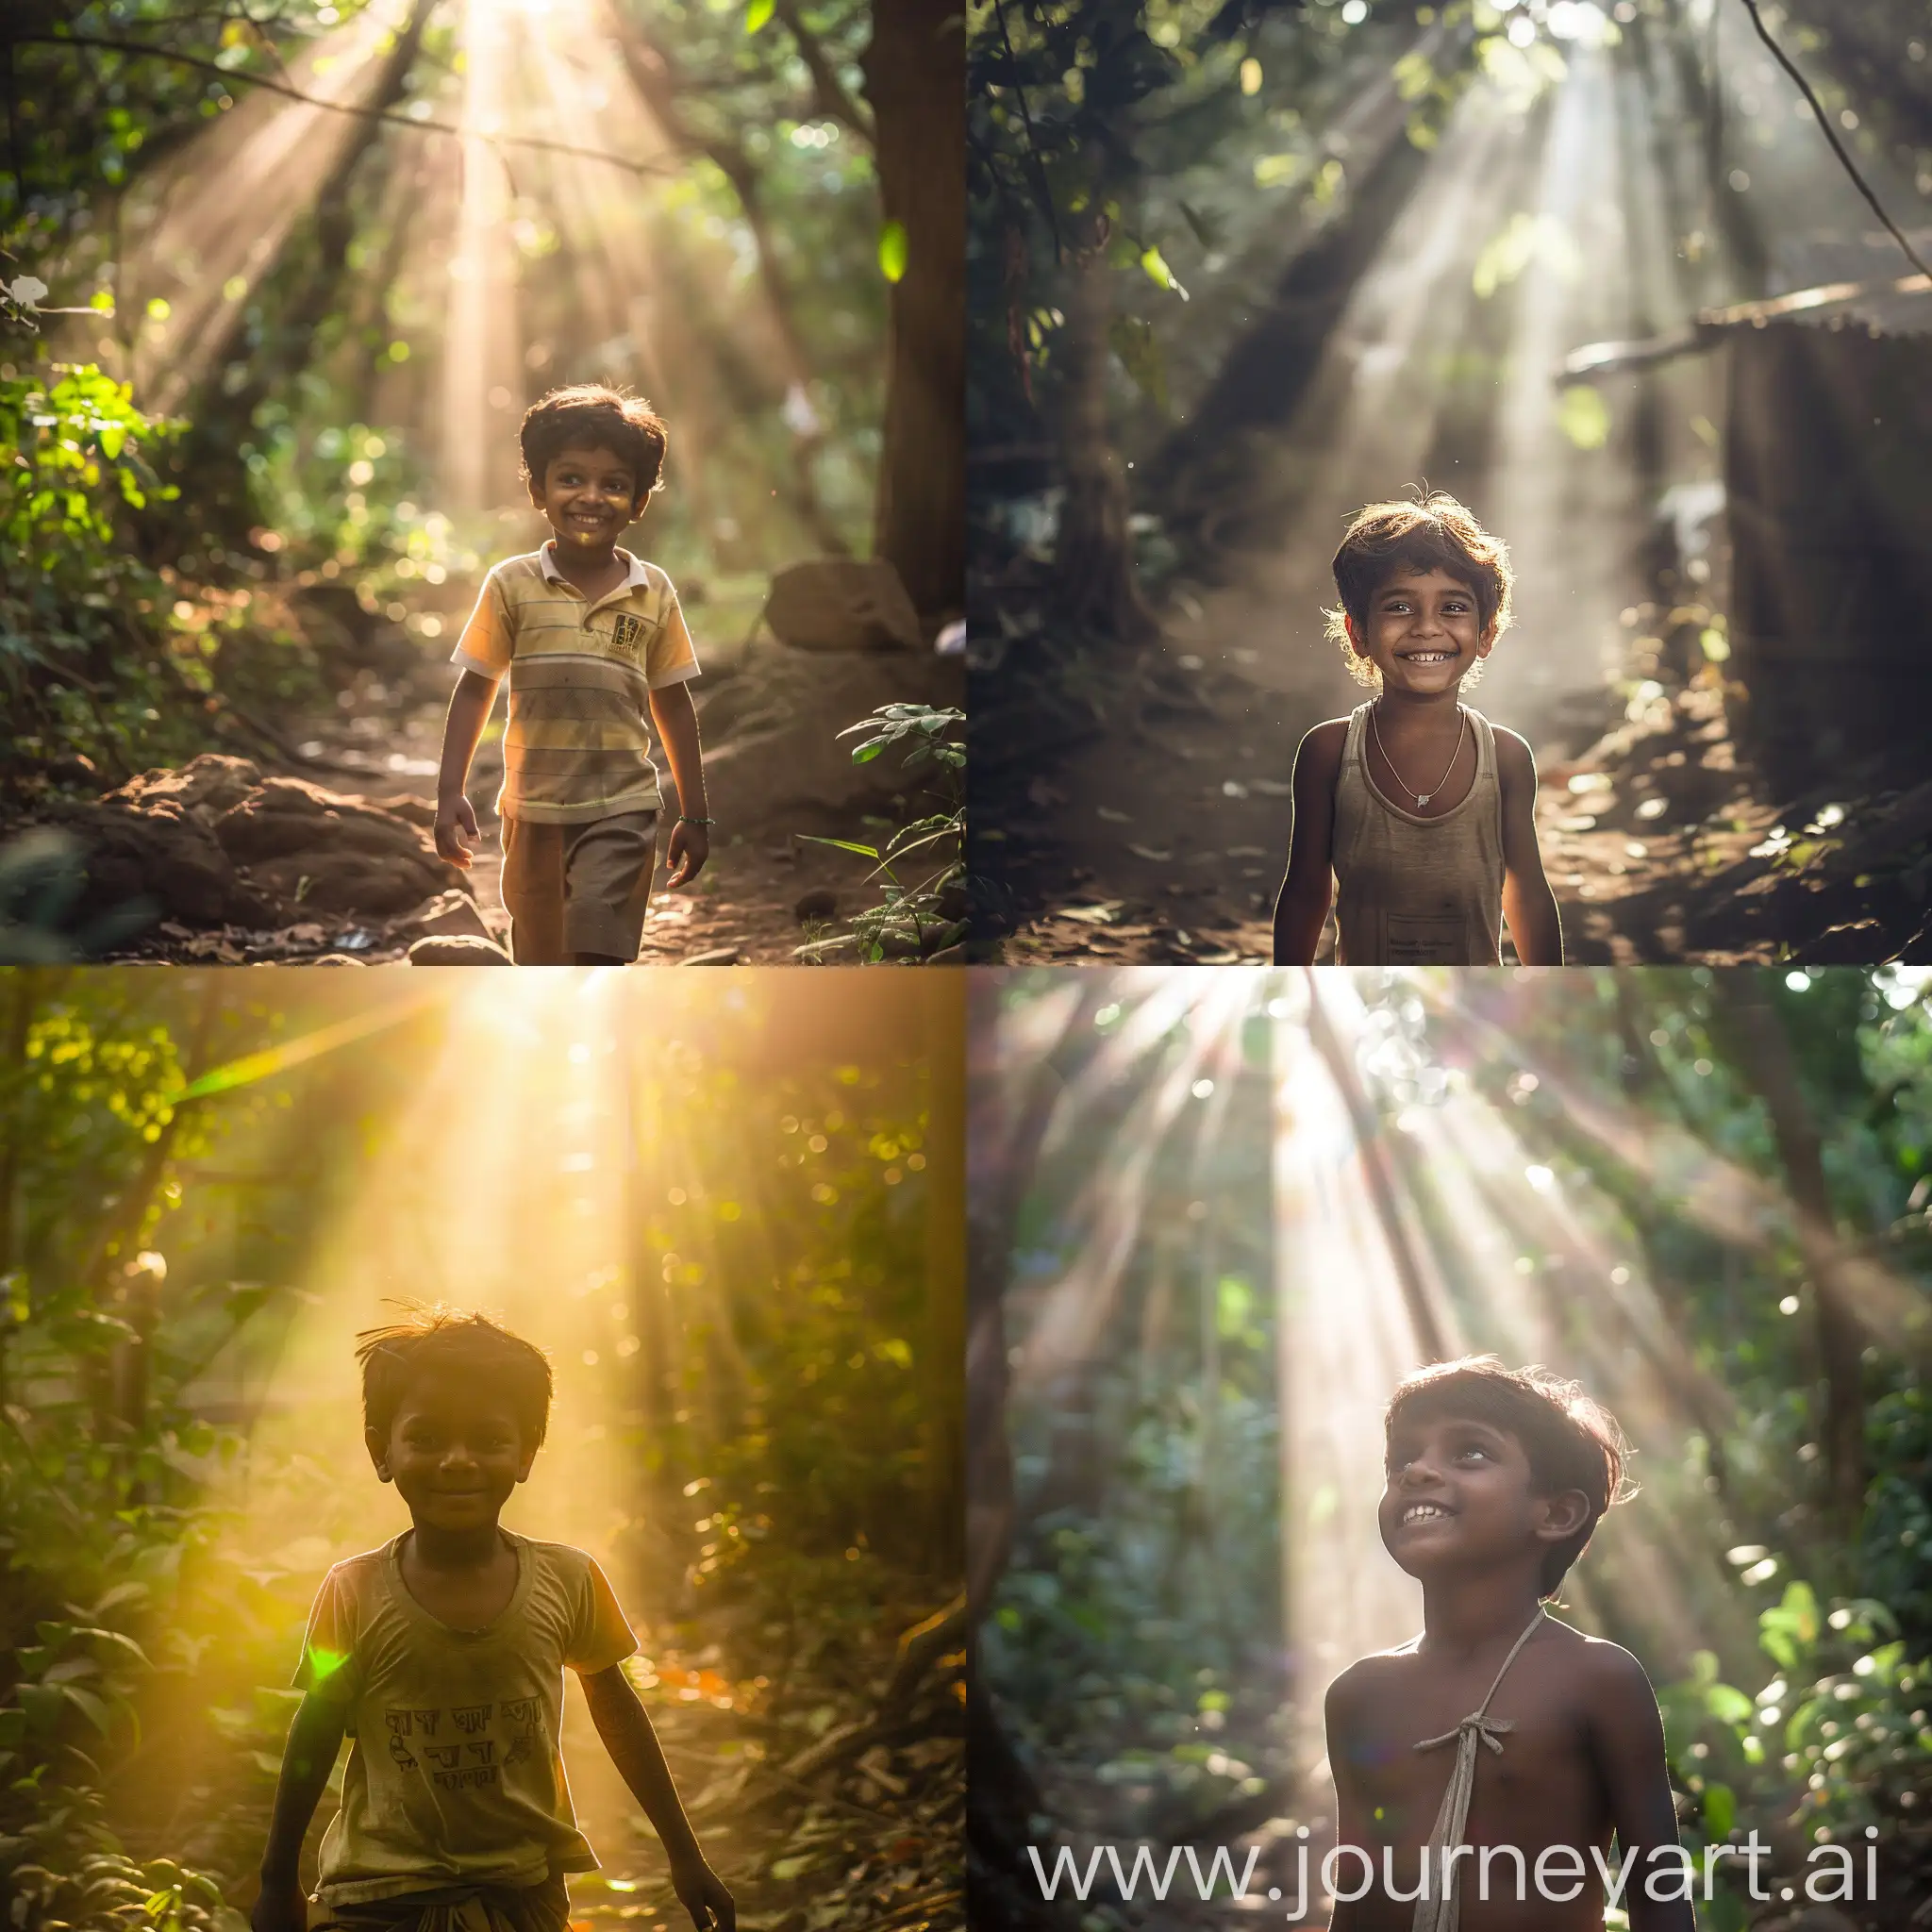 indian boy walking in forest, sunlight shining down, illuminating his face, full of smiles
